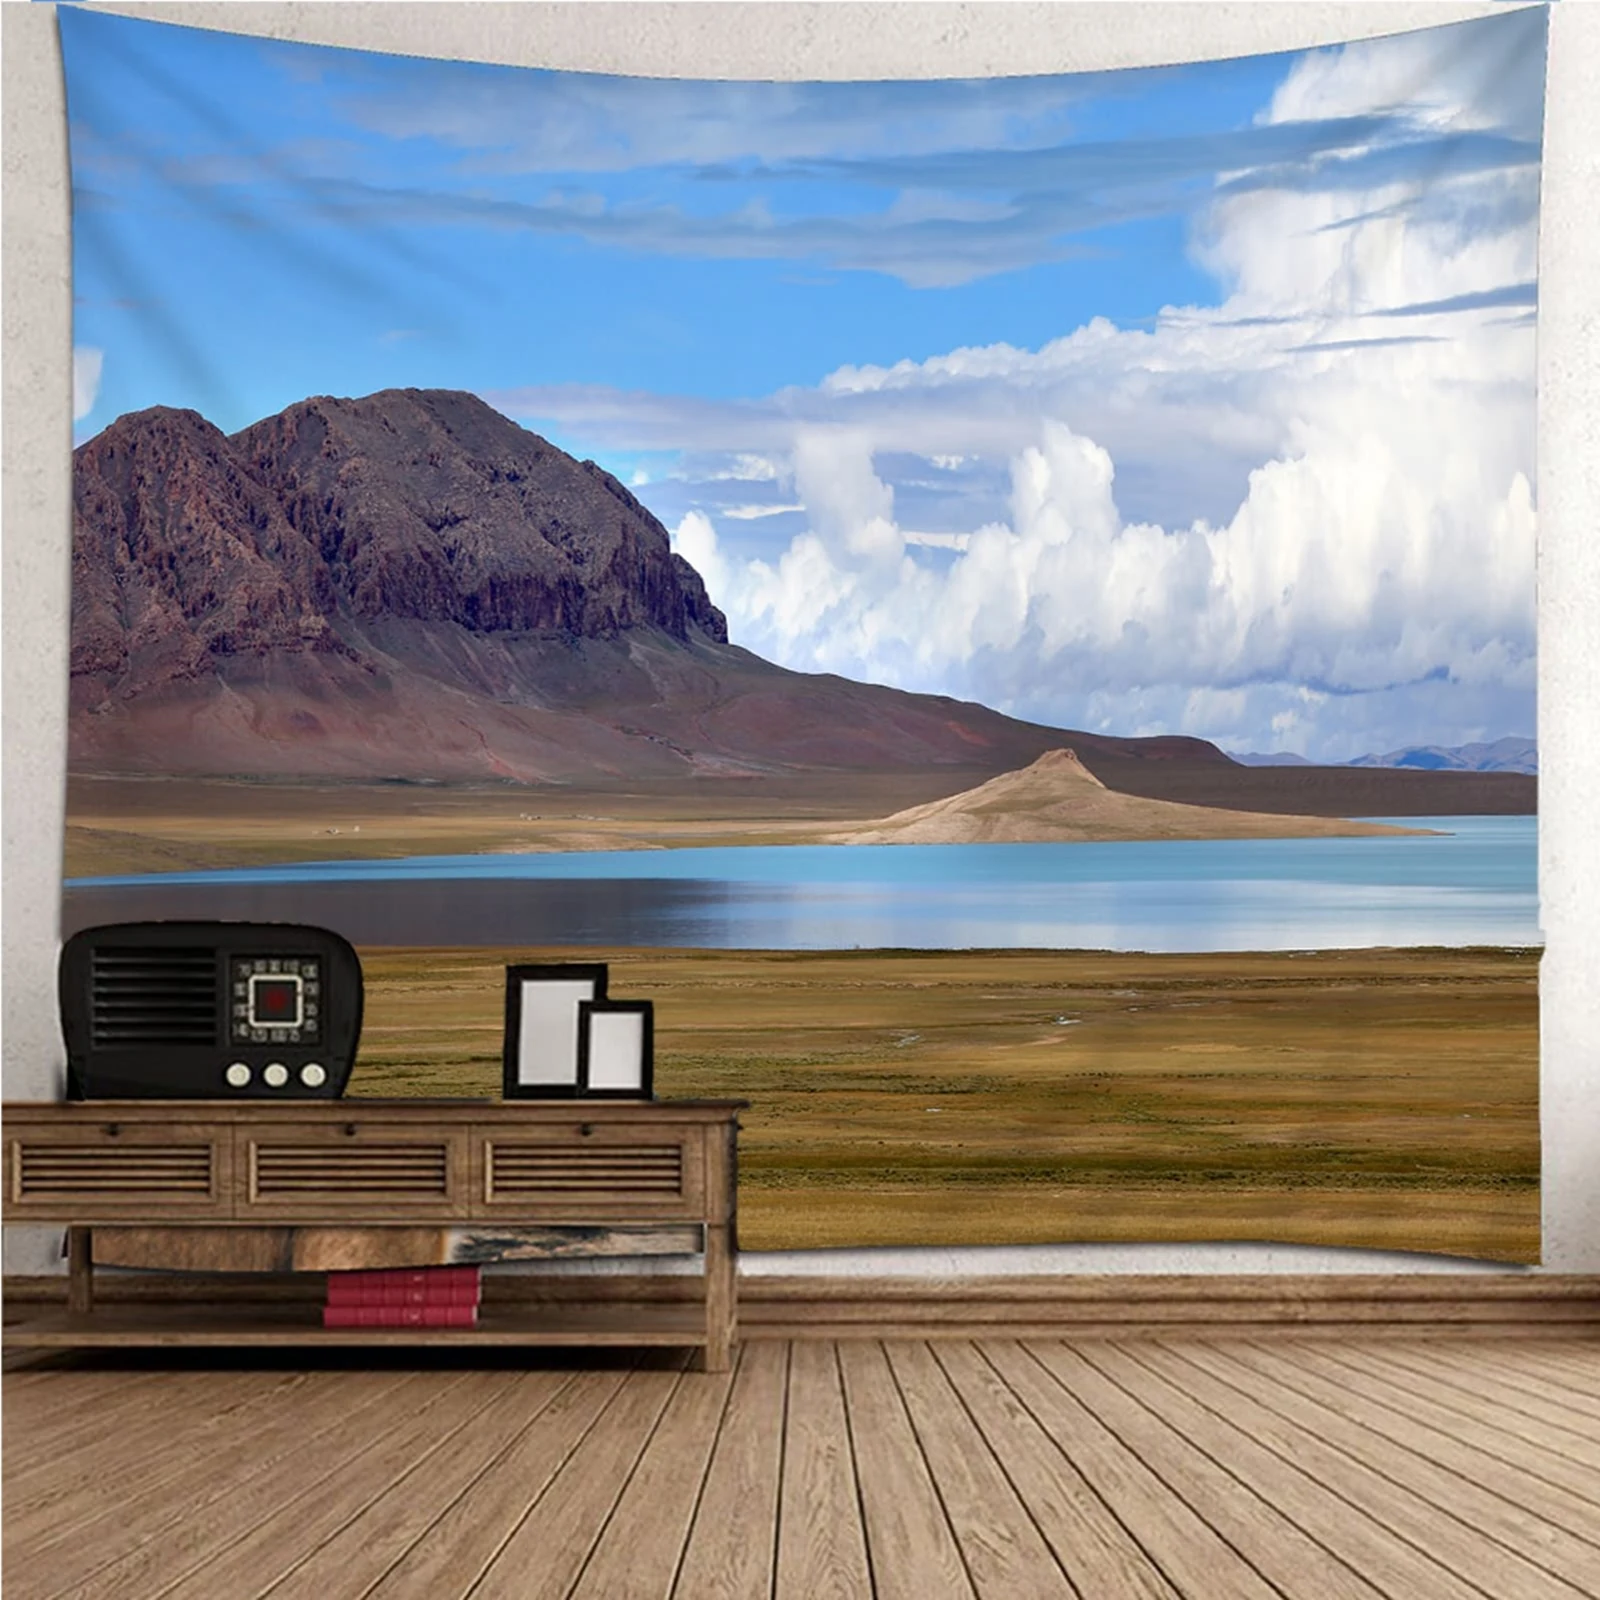 

Room Tapestry 3D Stickers Wall Decor natural scenery Mountains Rivers Sky Wall Hanging Blanket Dorm Art Decor Covering